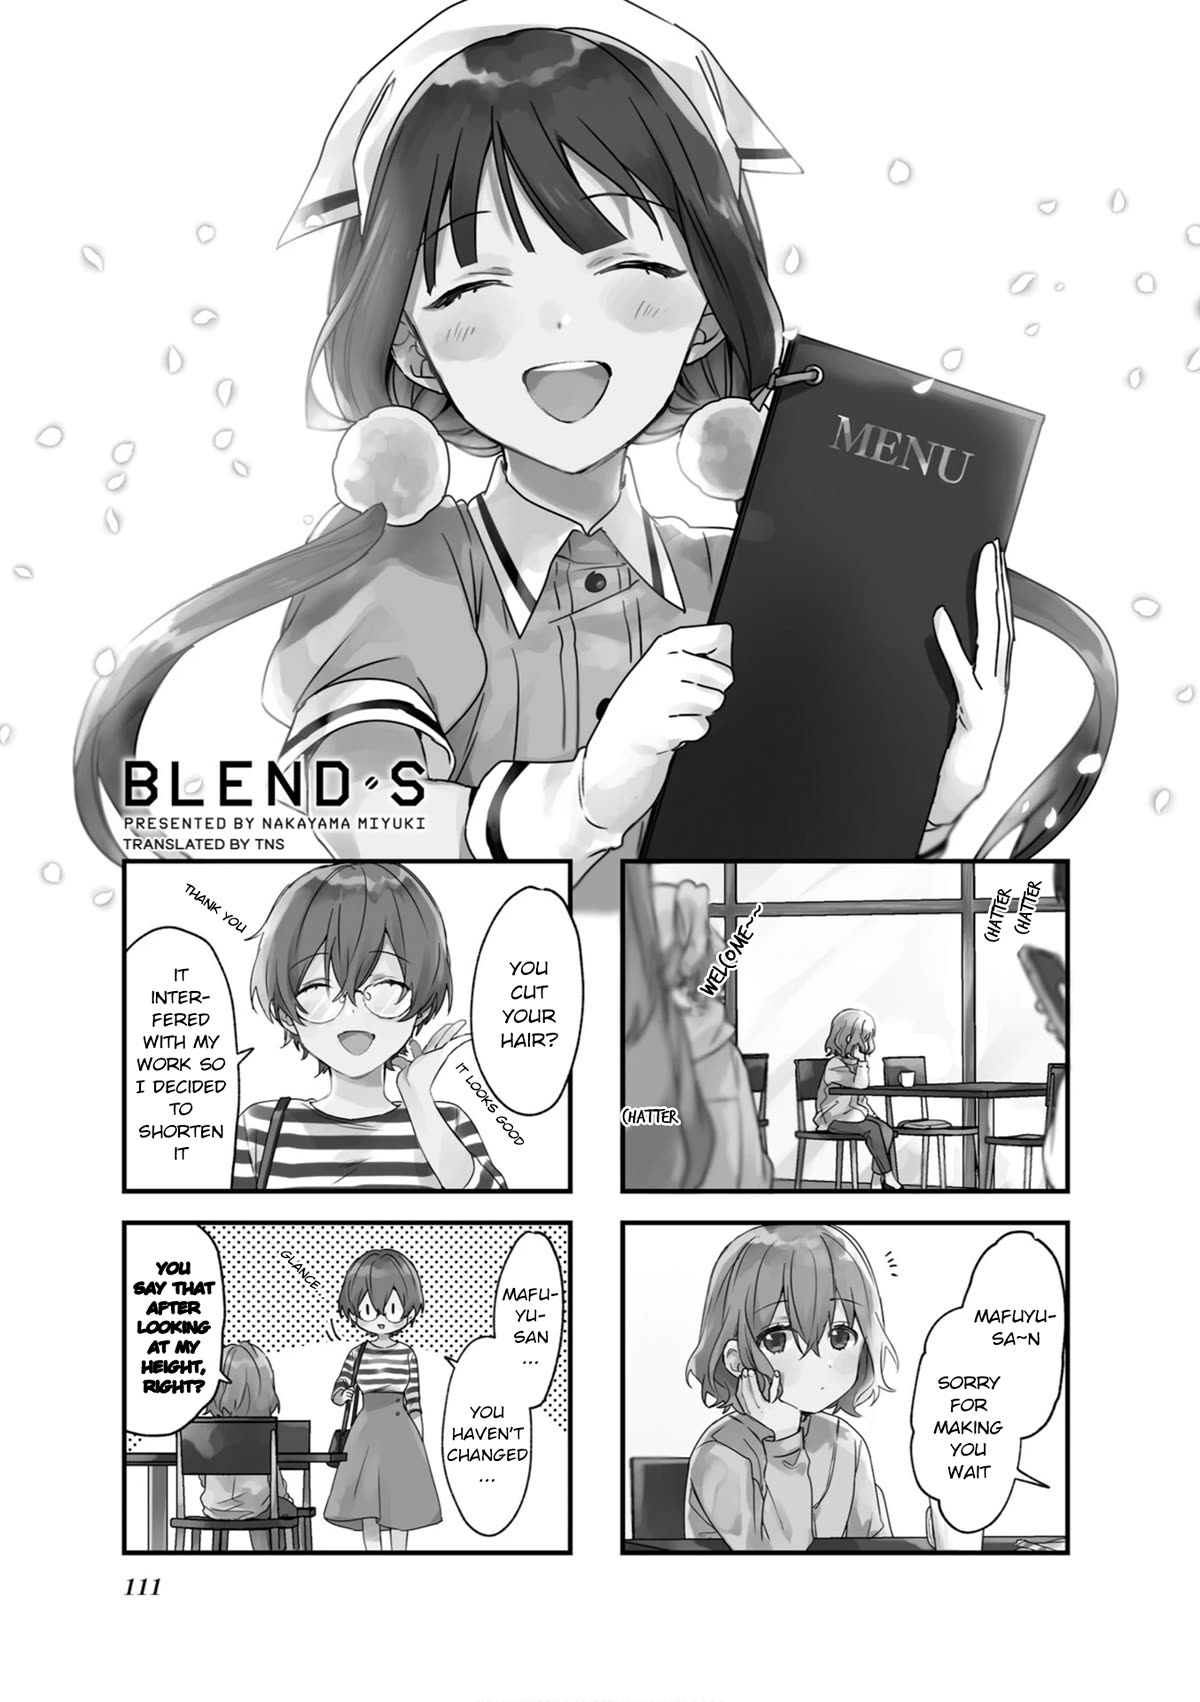 Blend S Chapter 113 [End]